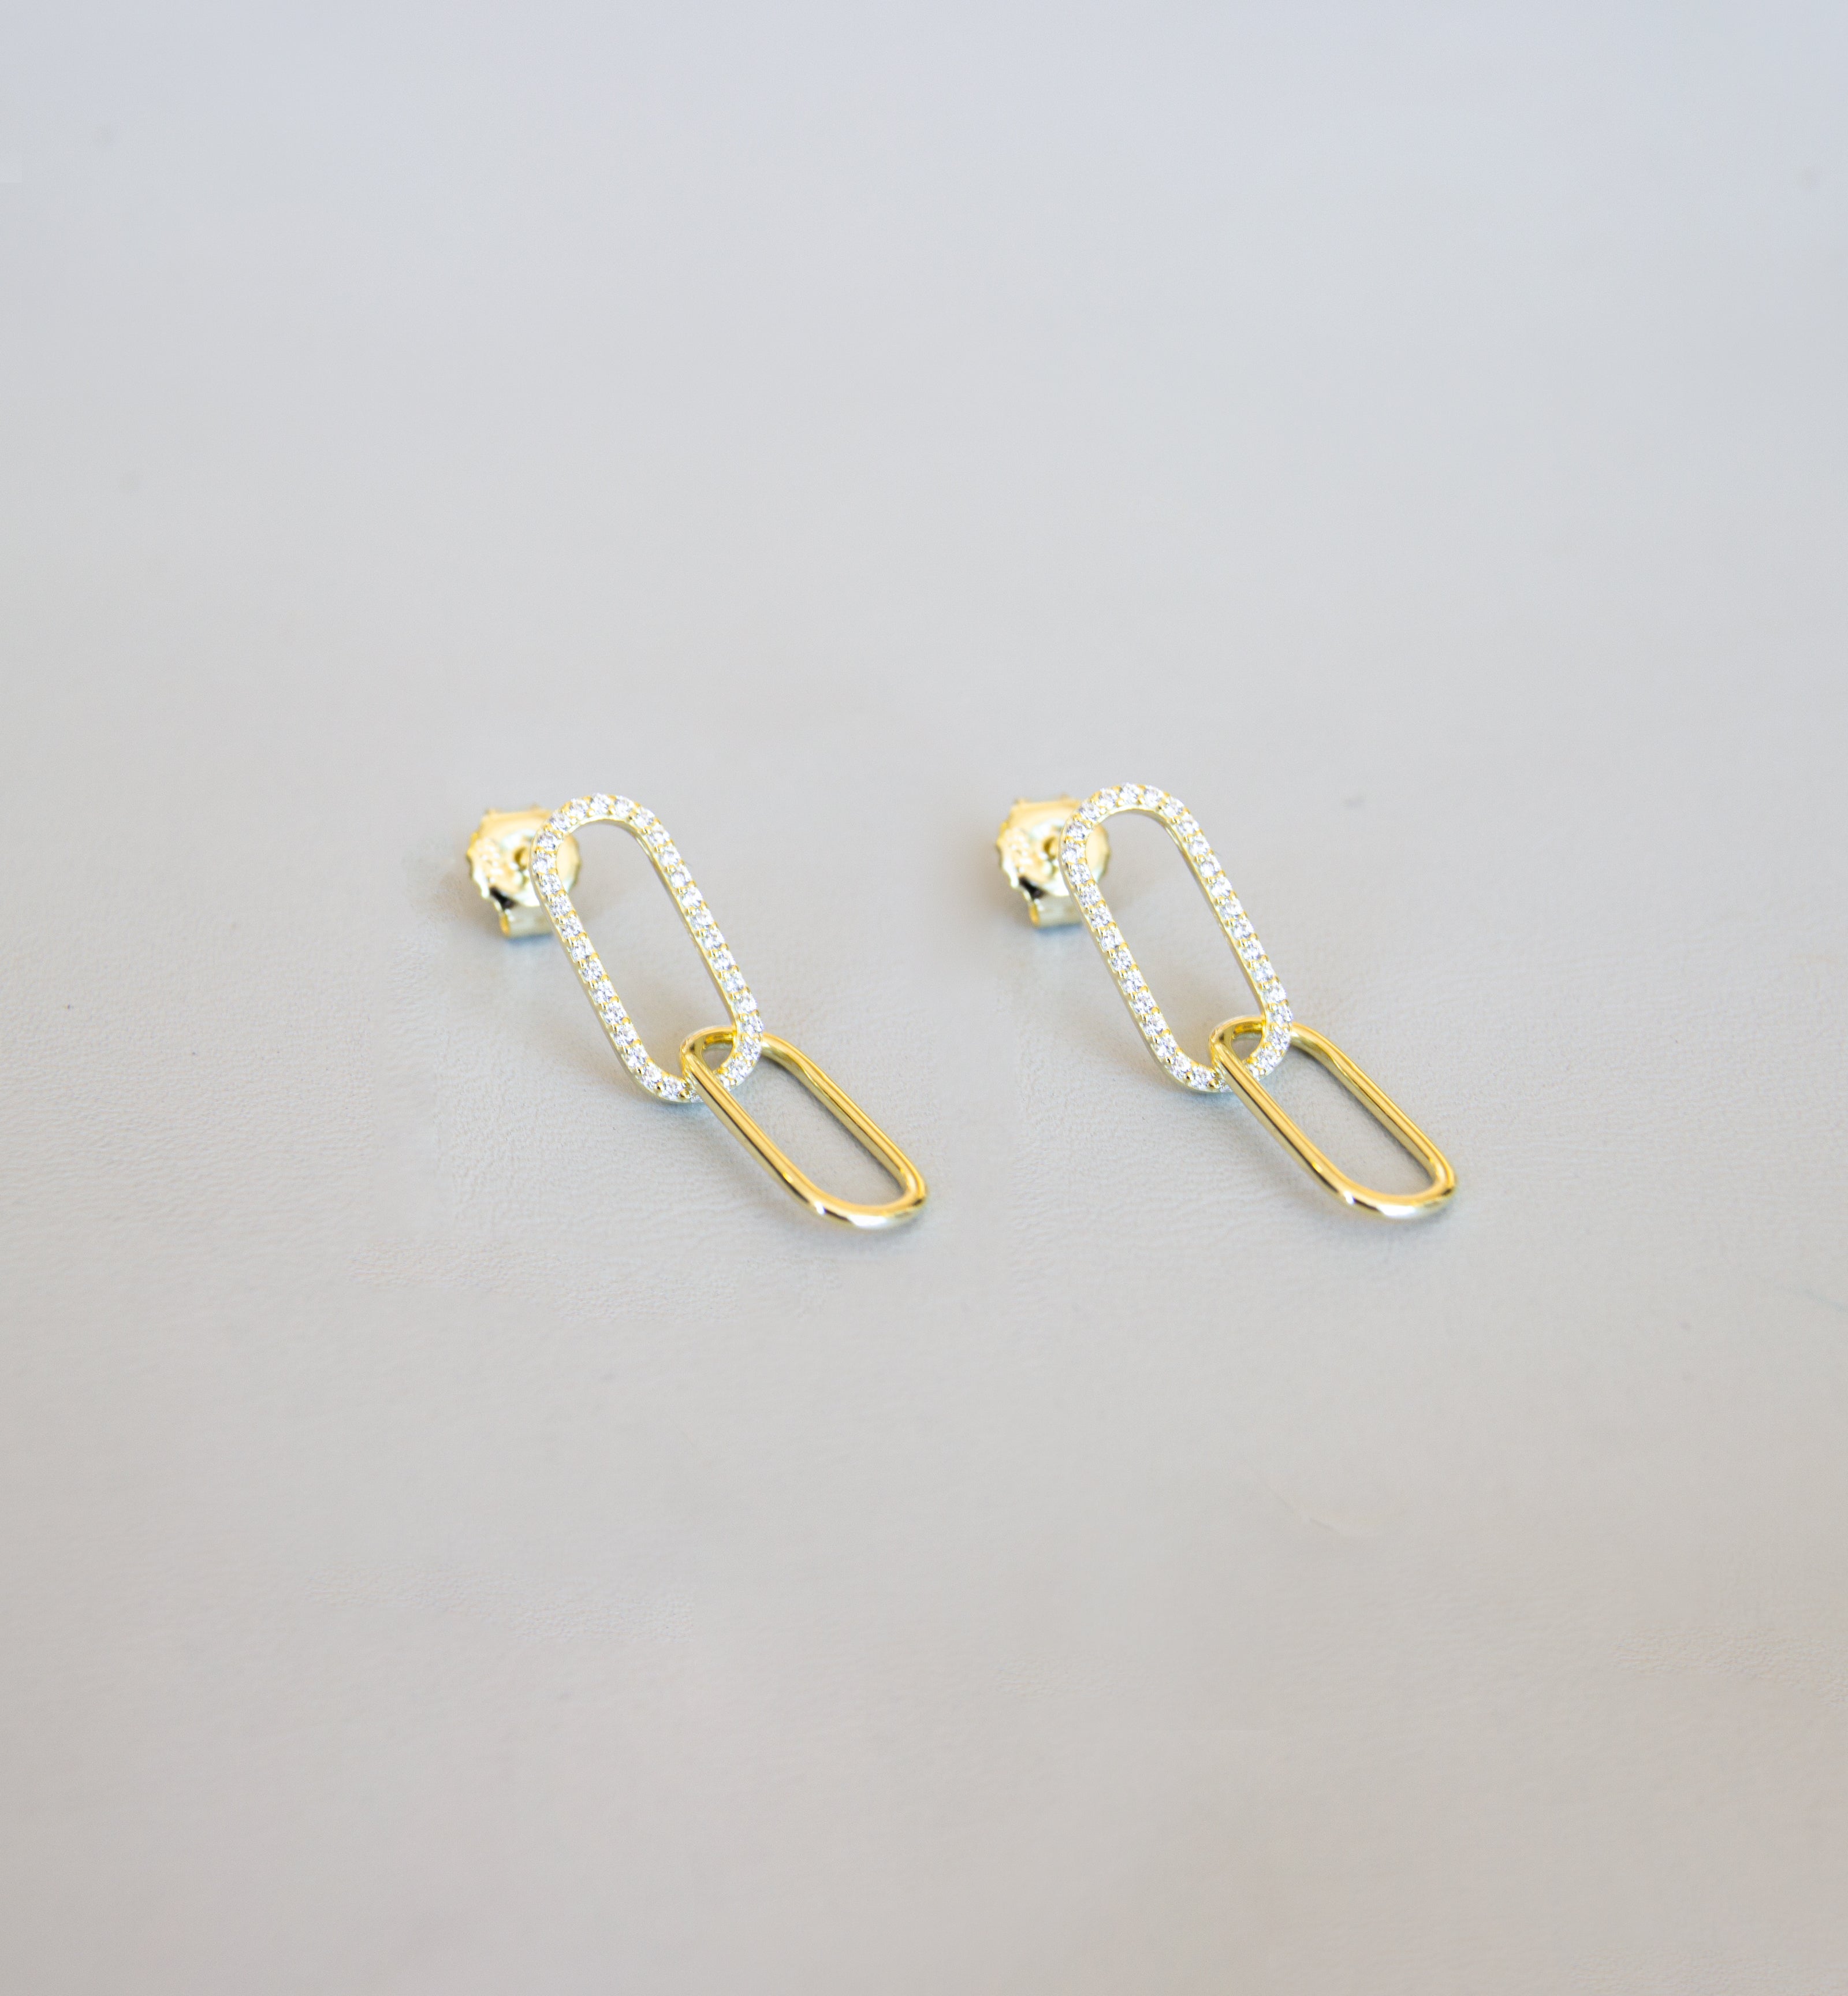 Silver 925 Yellow Gold Plated Link Earrings